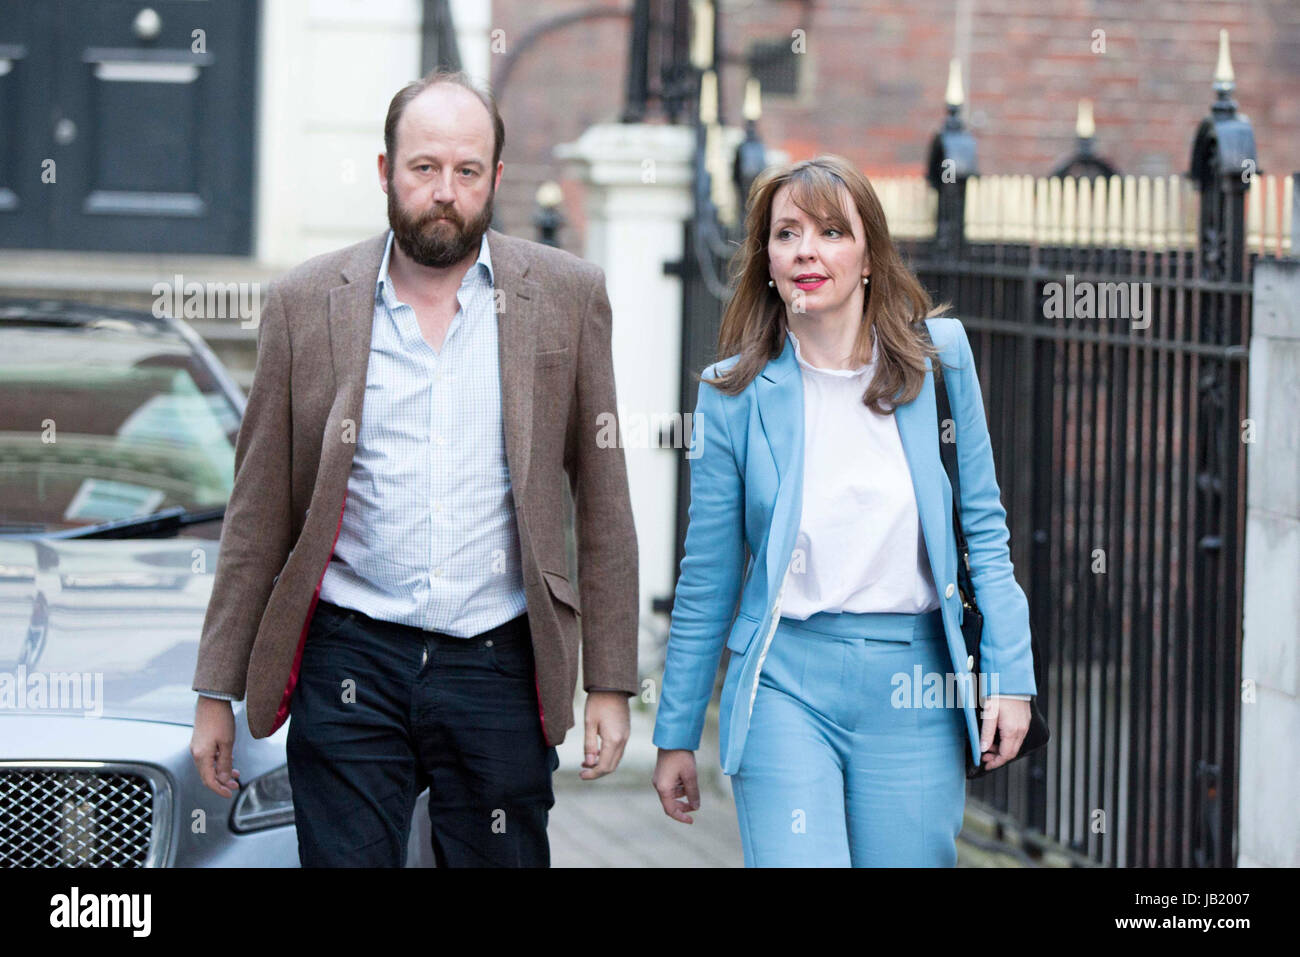 Prime Minister Theresa May's chief of staff Nick Timothy and Joint-chief of staff Fiona Hill leave Conservative Party HQ in Westminster, London, as Mrs May's future as Prime Minister and leader of the Conservatives was being openly questioned after her decision to hold a snap election disastrously backfired. Stock Photo